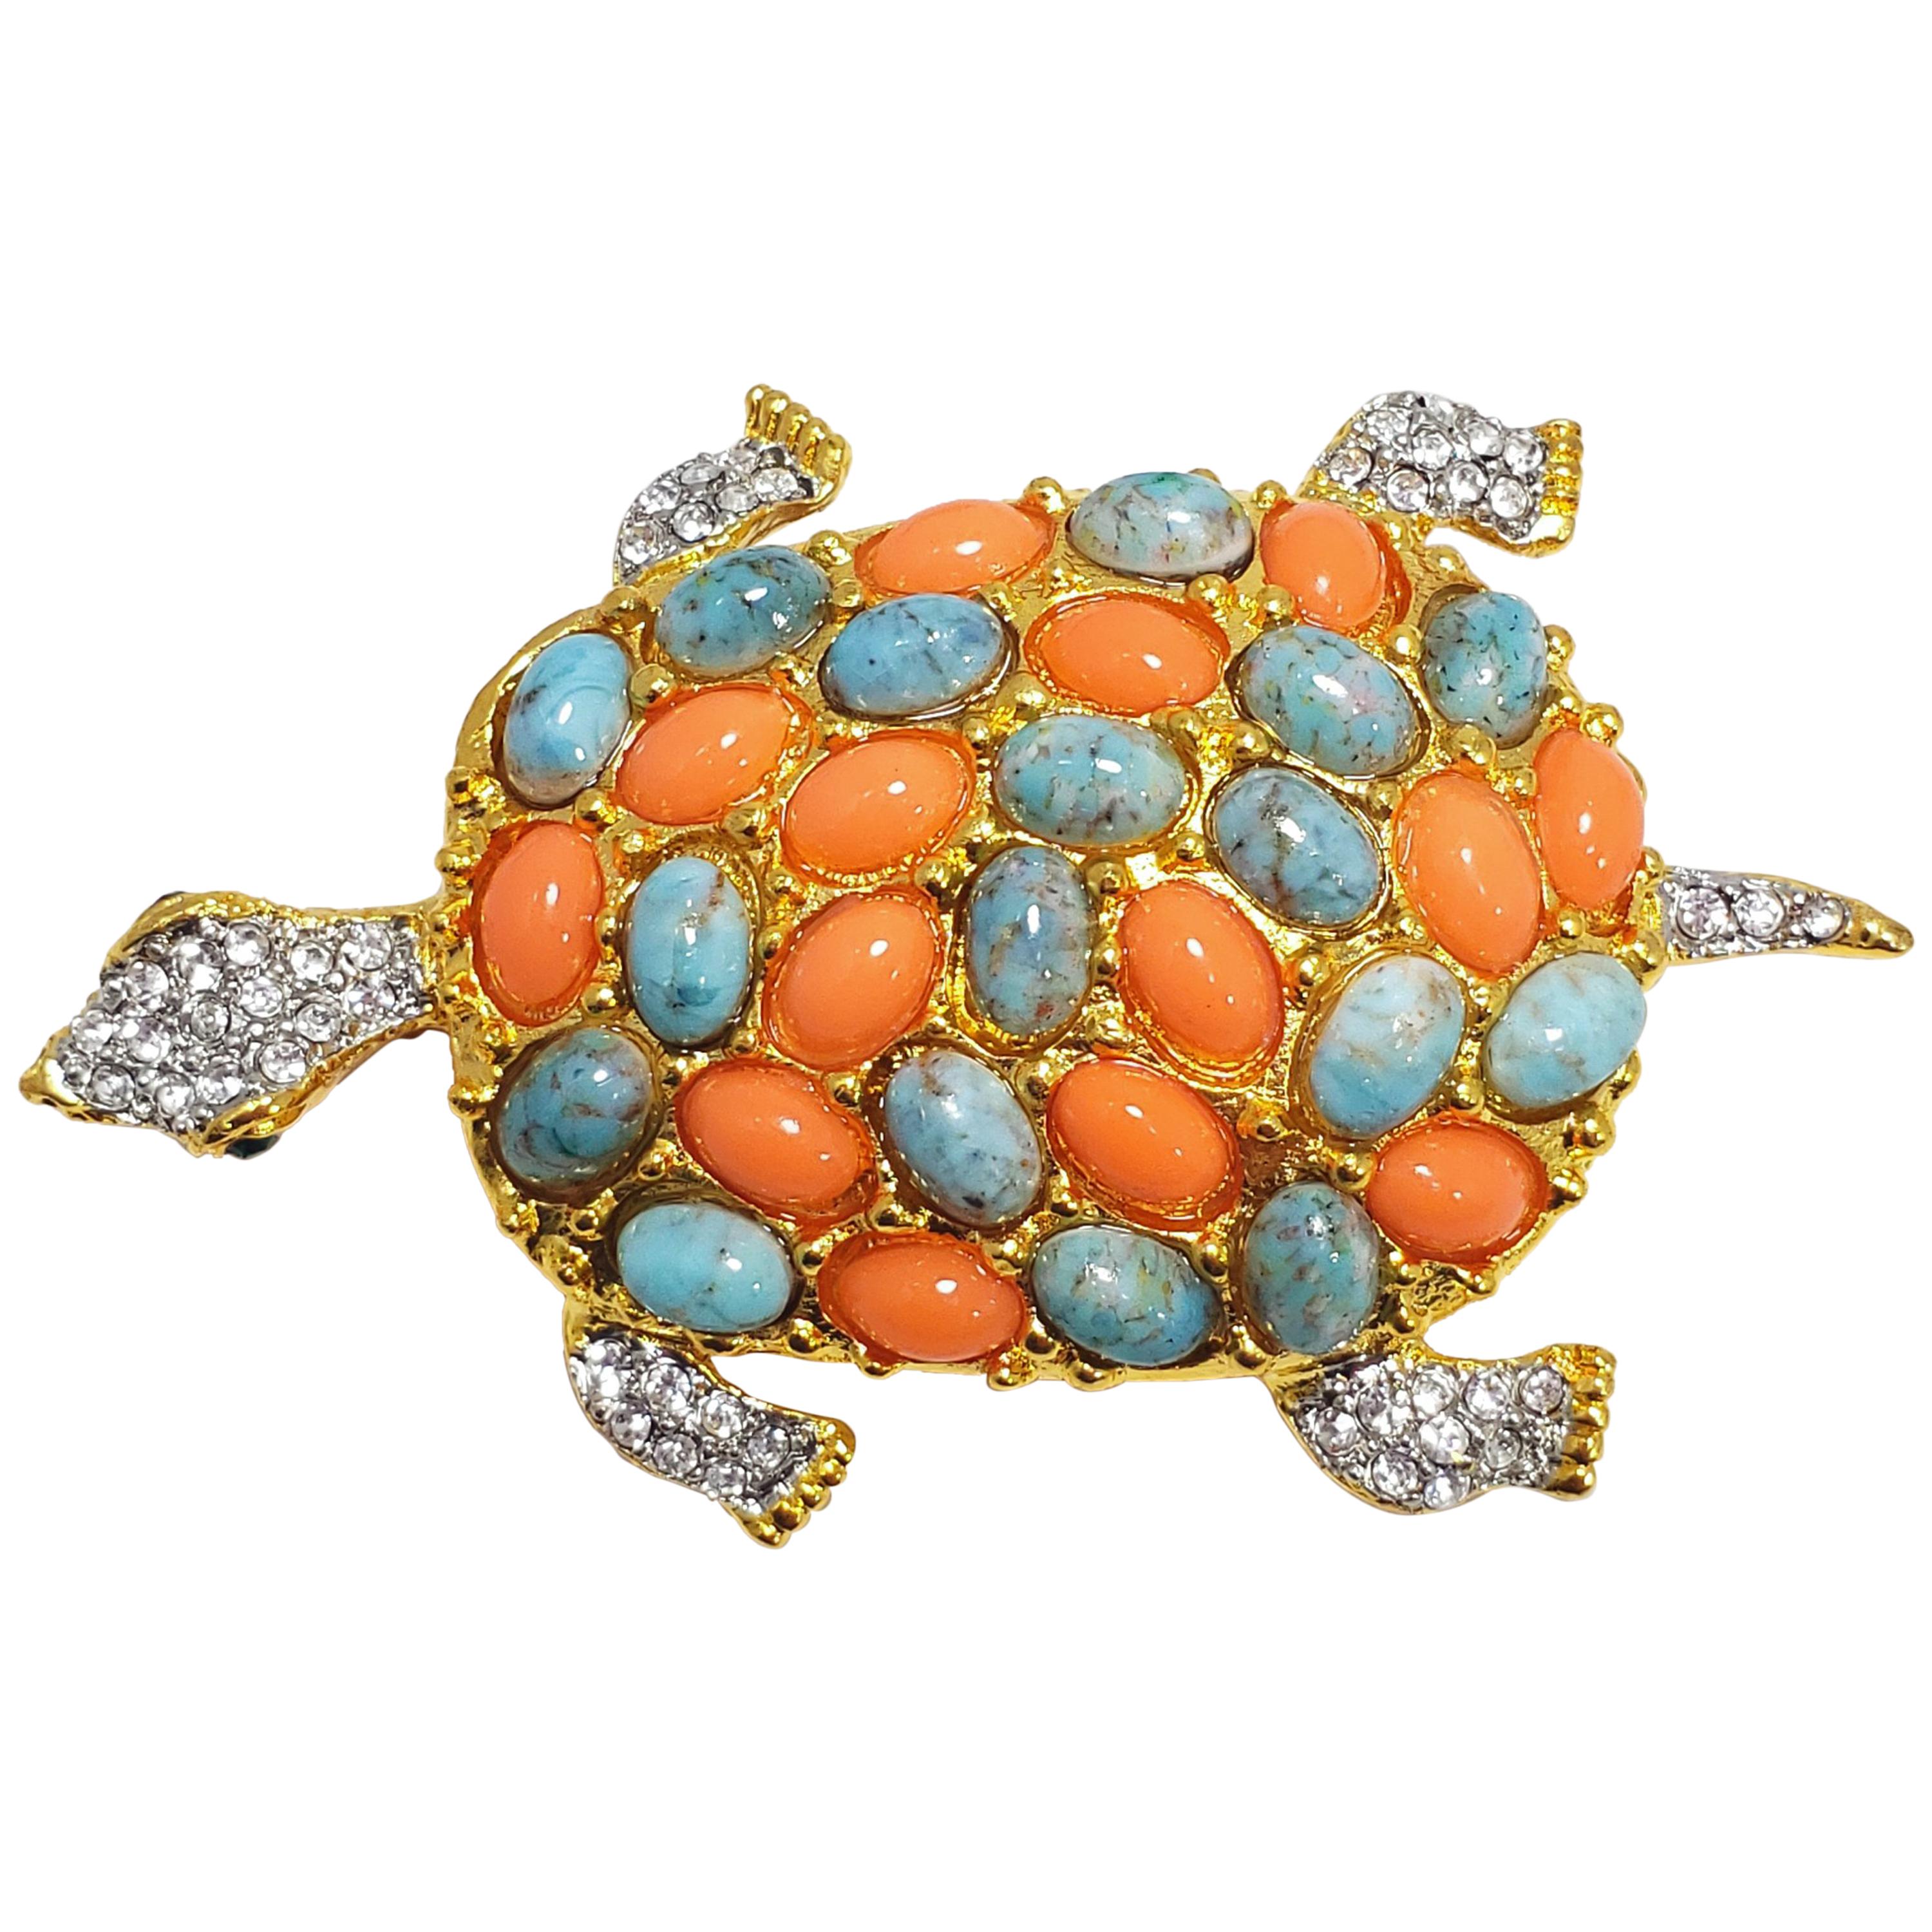 KJL Kenneth Jay Lane Pave Cabochon & Crystal Turtle Brooch Pin in Gold